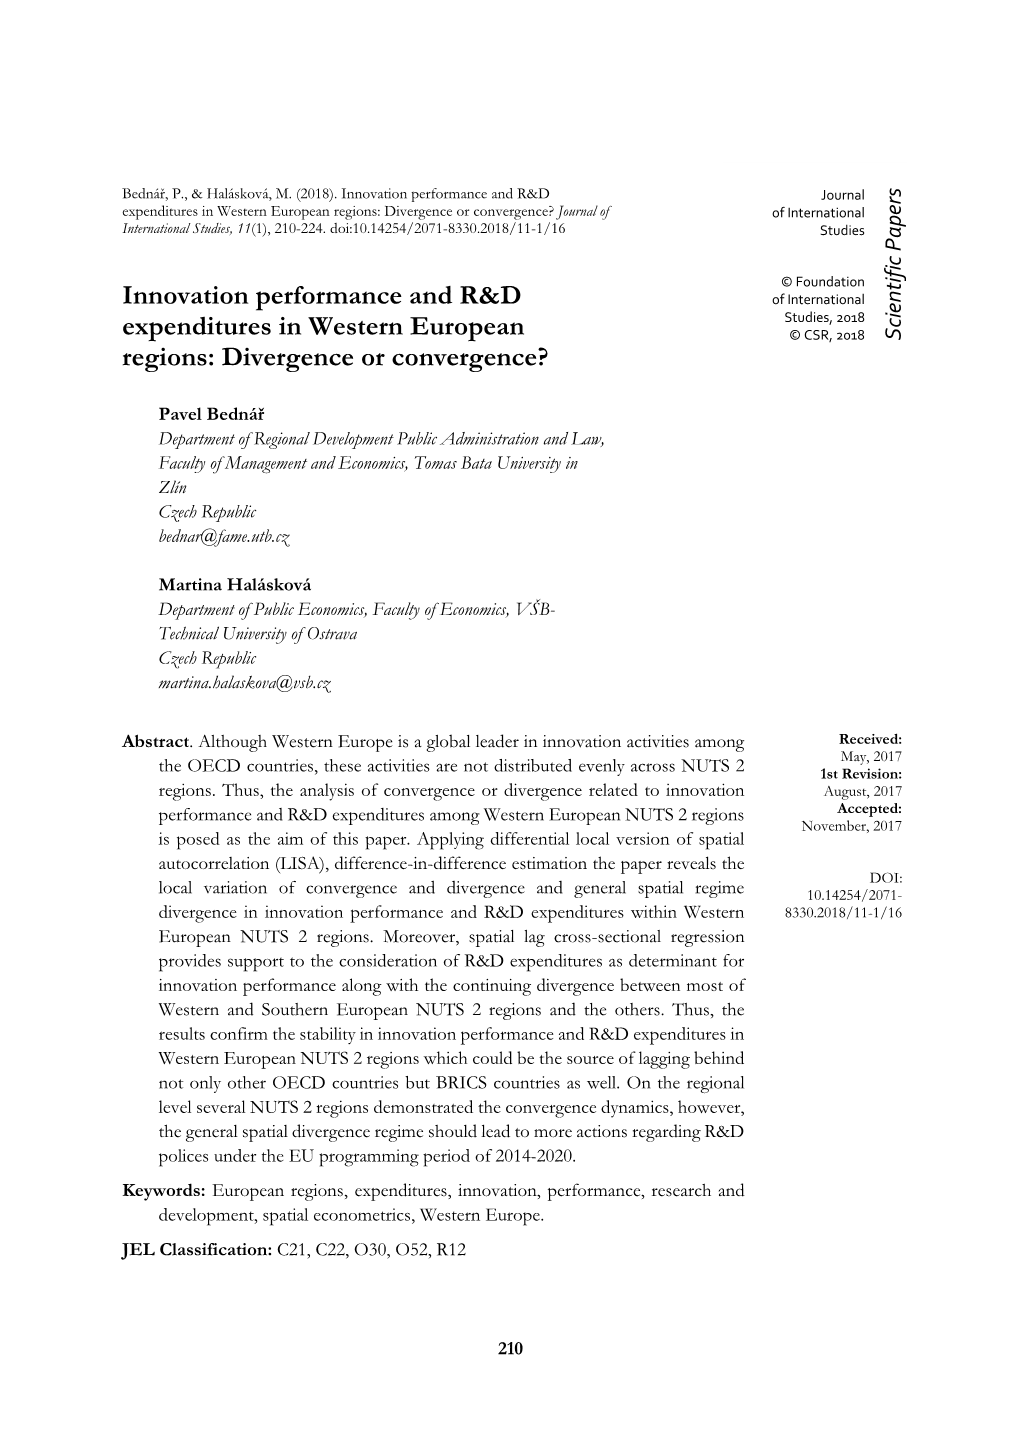 Innovation Performance and R&D Expenditures in Western European Regions: Divergence Or Convergence?